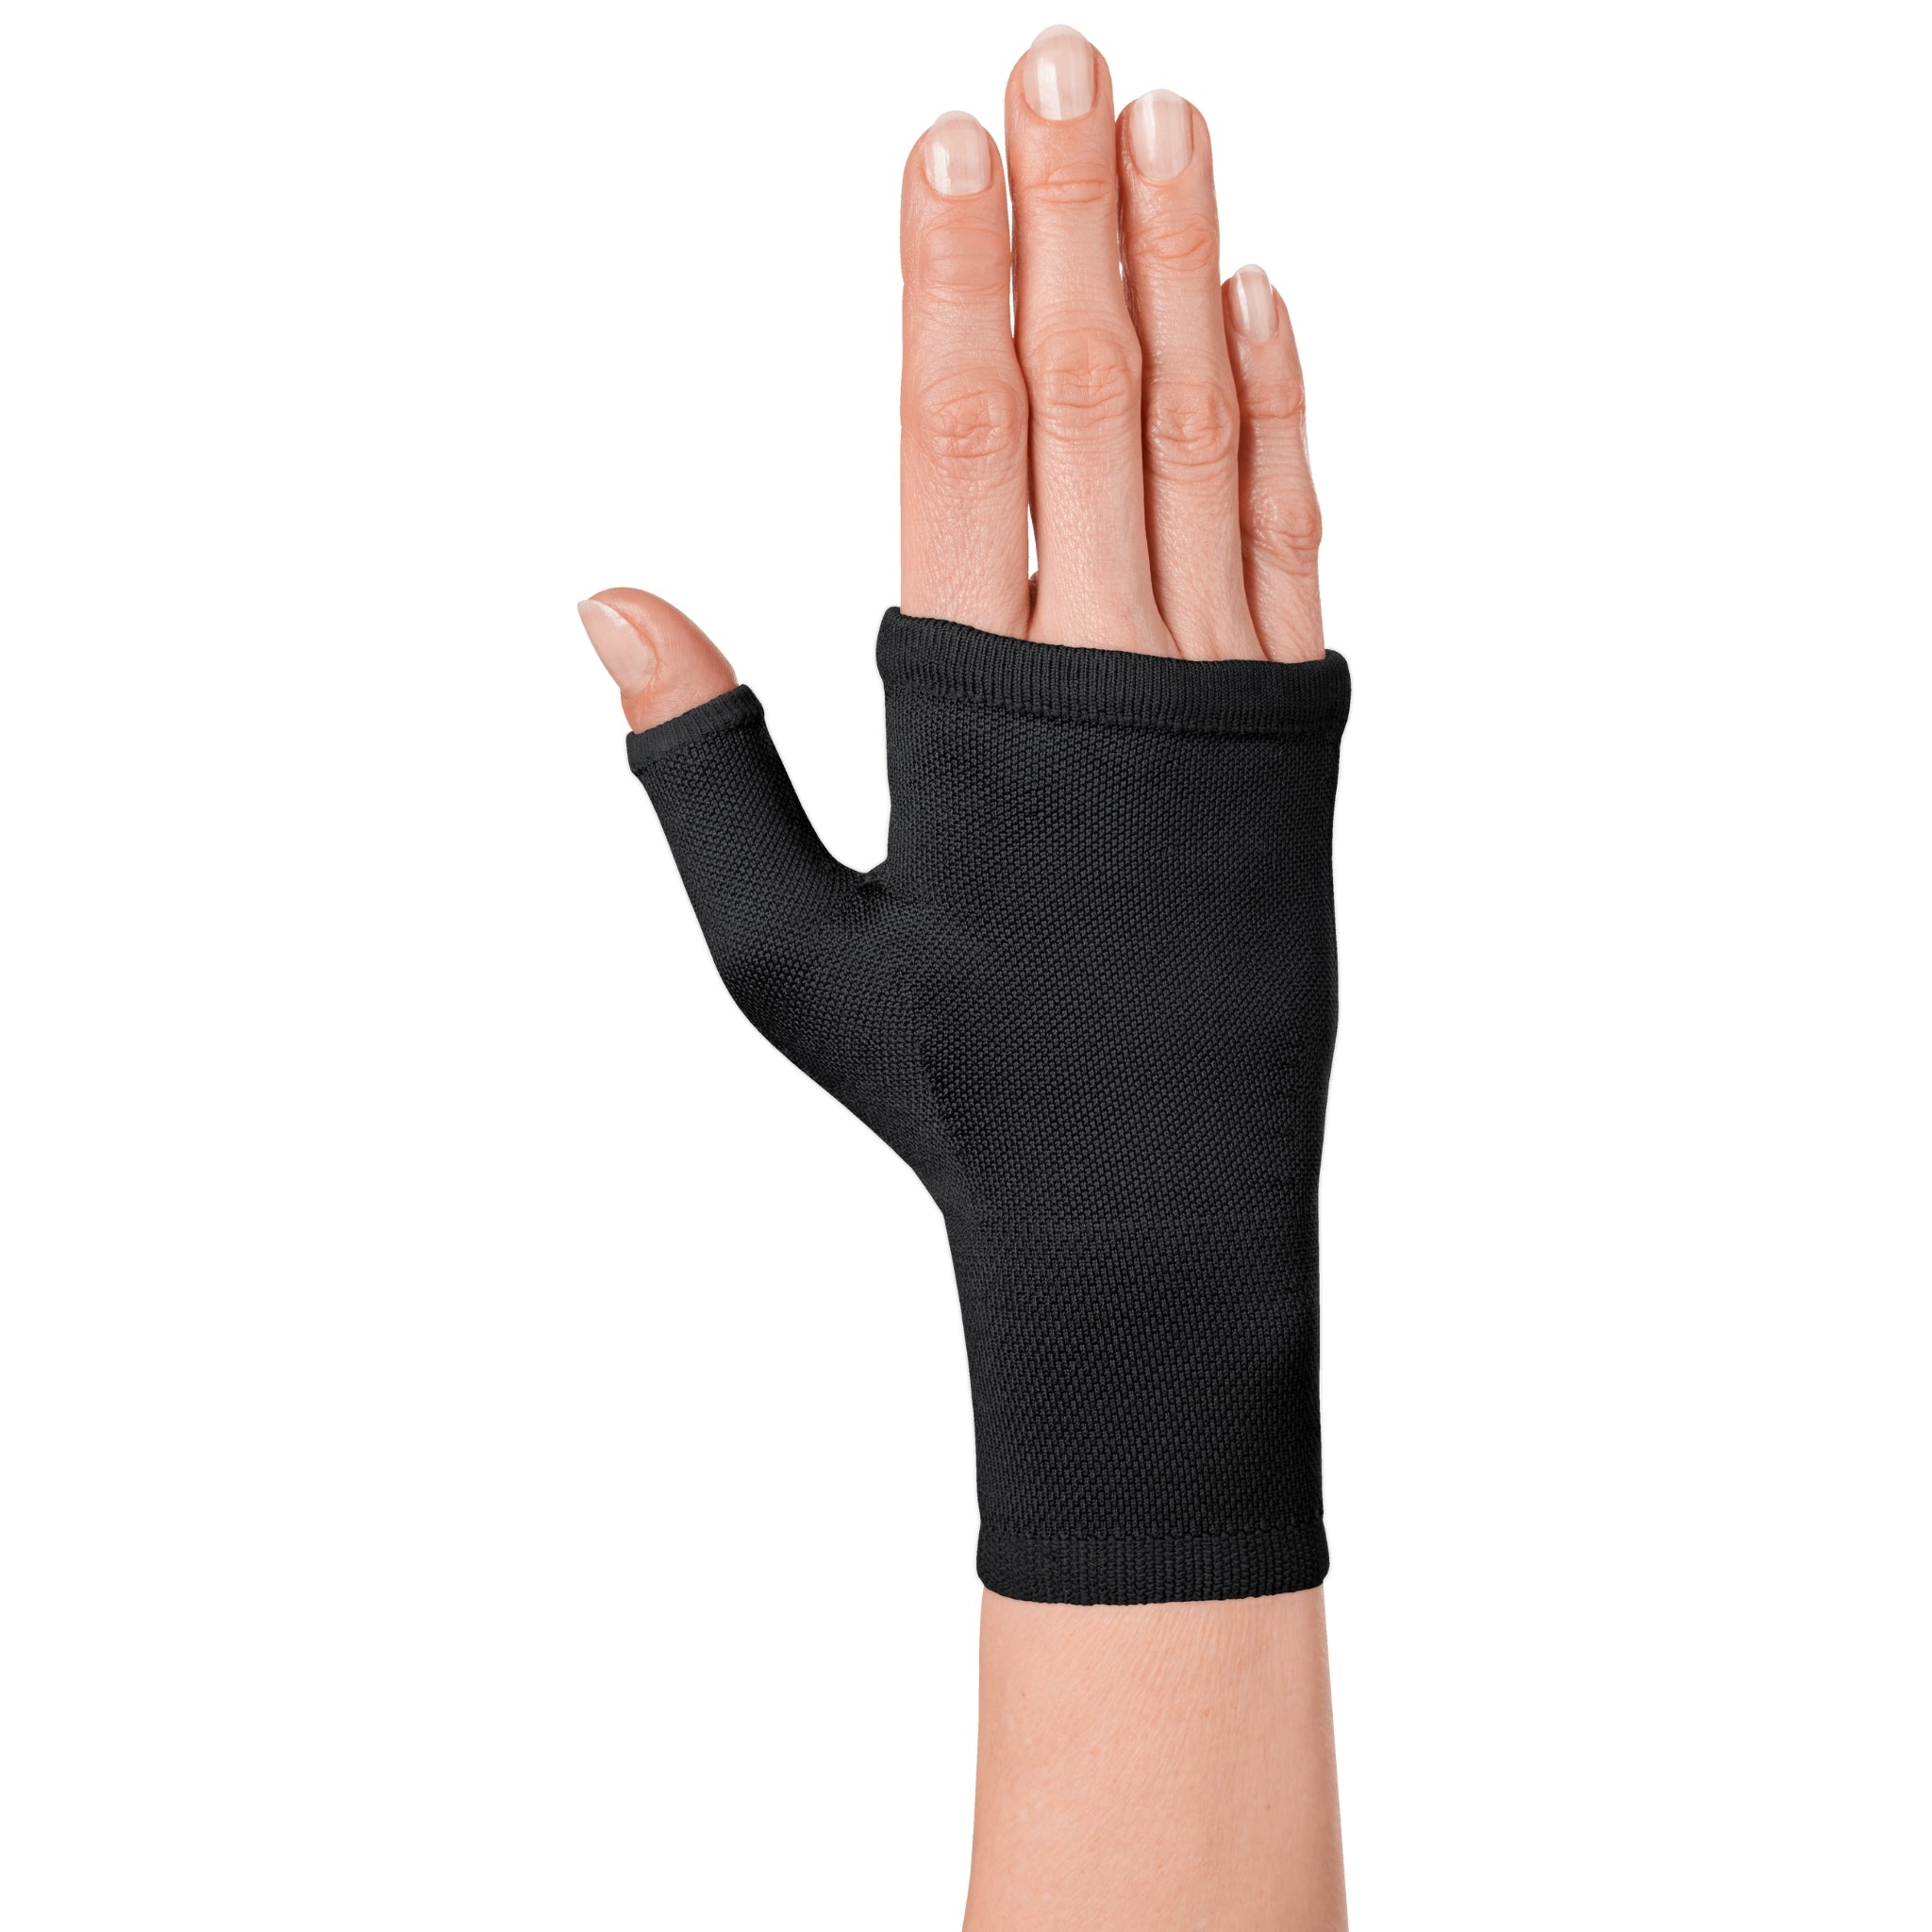 mediven® harmony Seamless Glove without Fingers